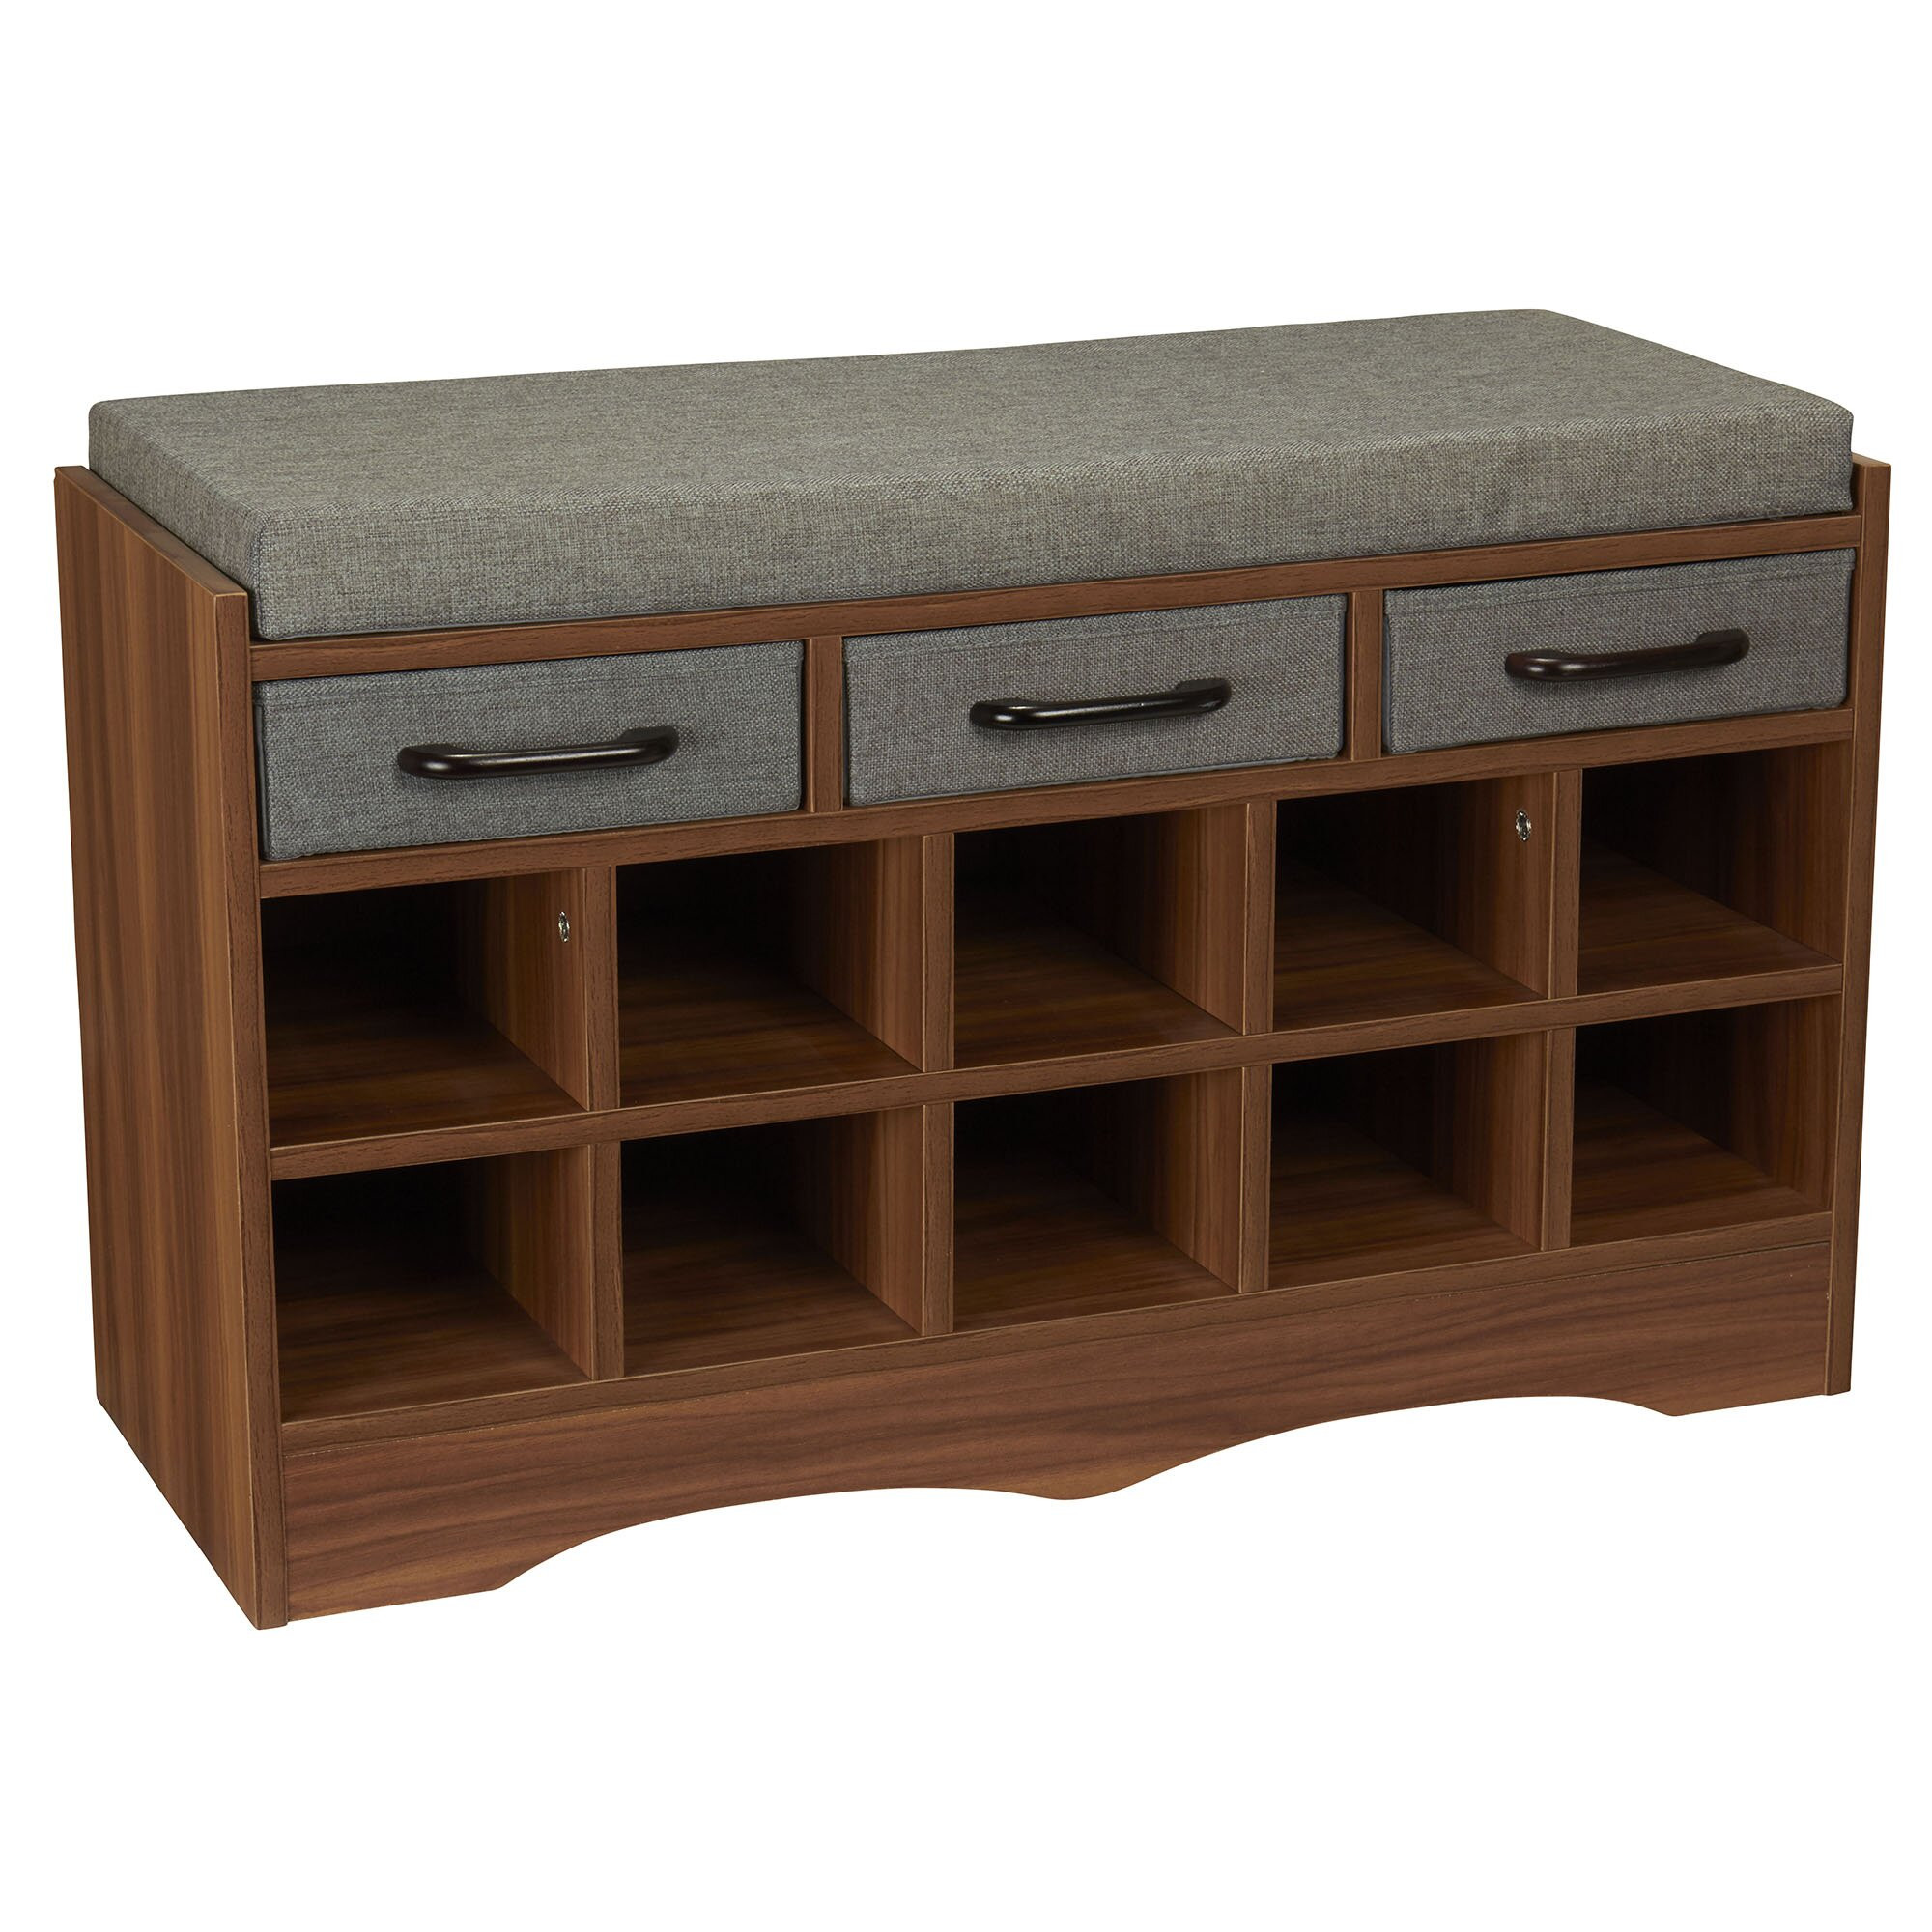 Bench For Entryway With Storage
 Household Essentials Entryway Shoe Storage Bench & Reviews